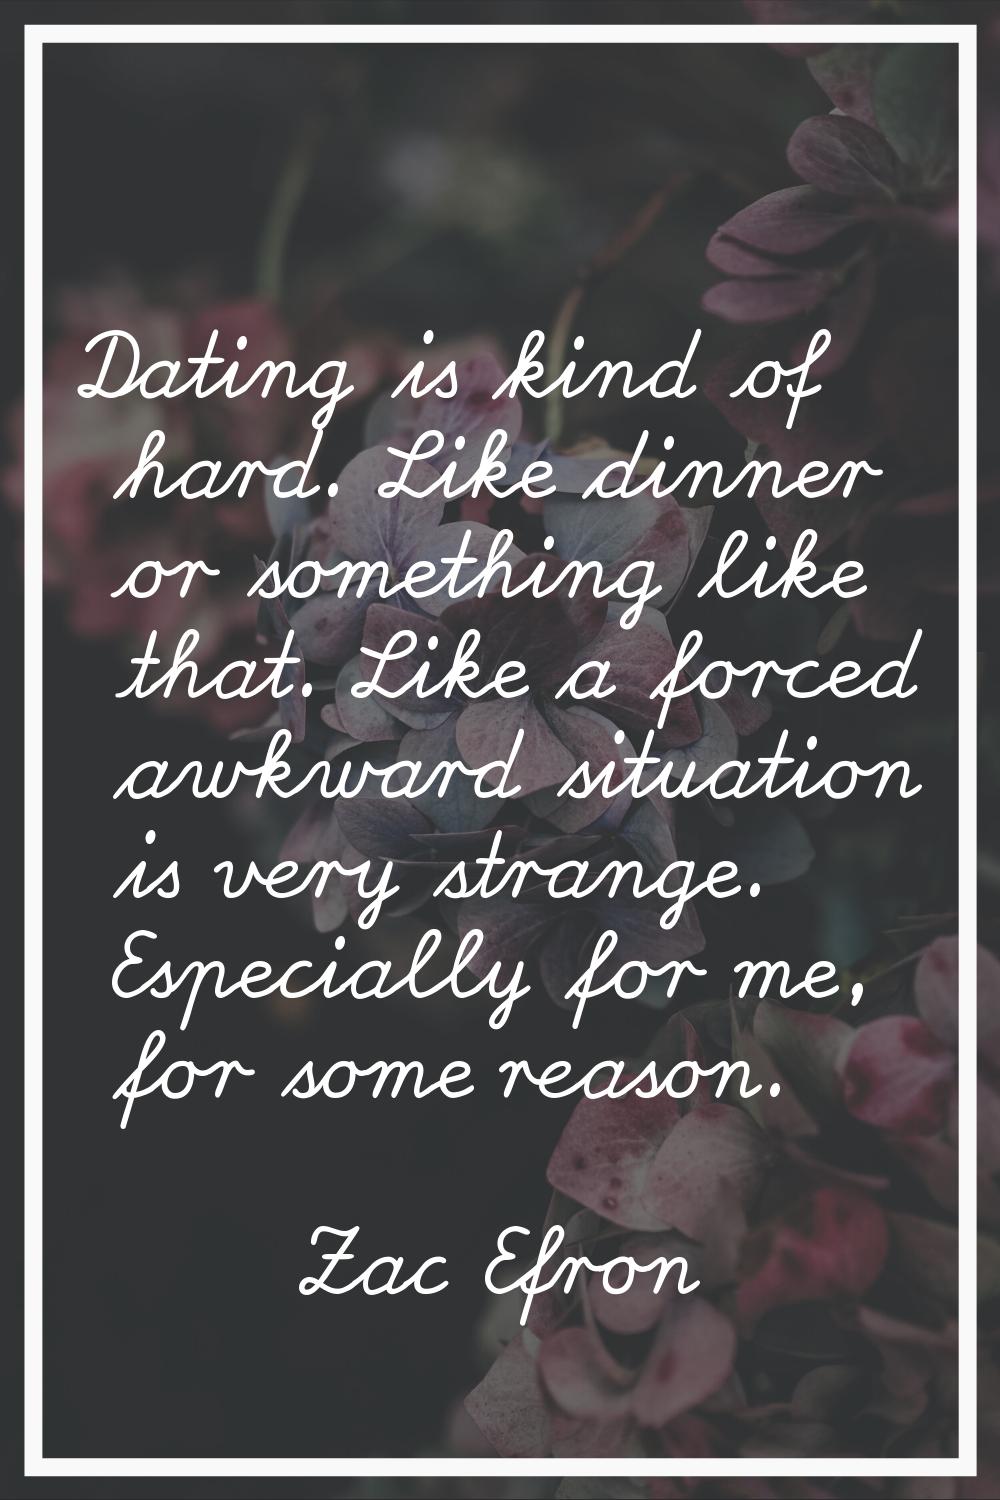 Dating is kind of hard. Like dinner or something like that. Like a forced awkward situation is very